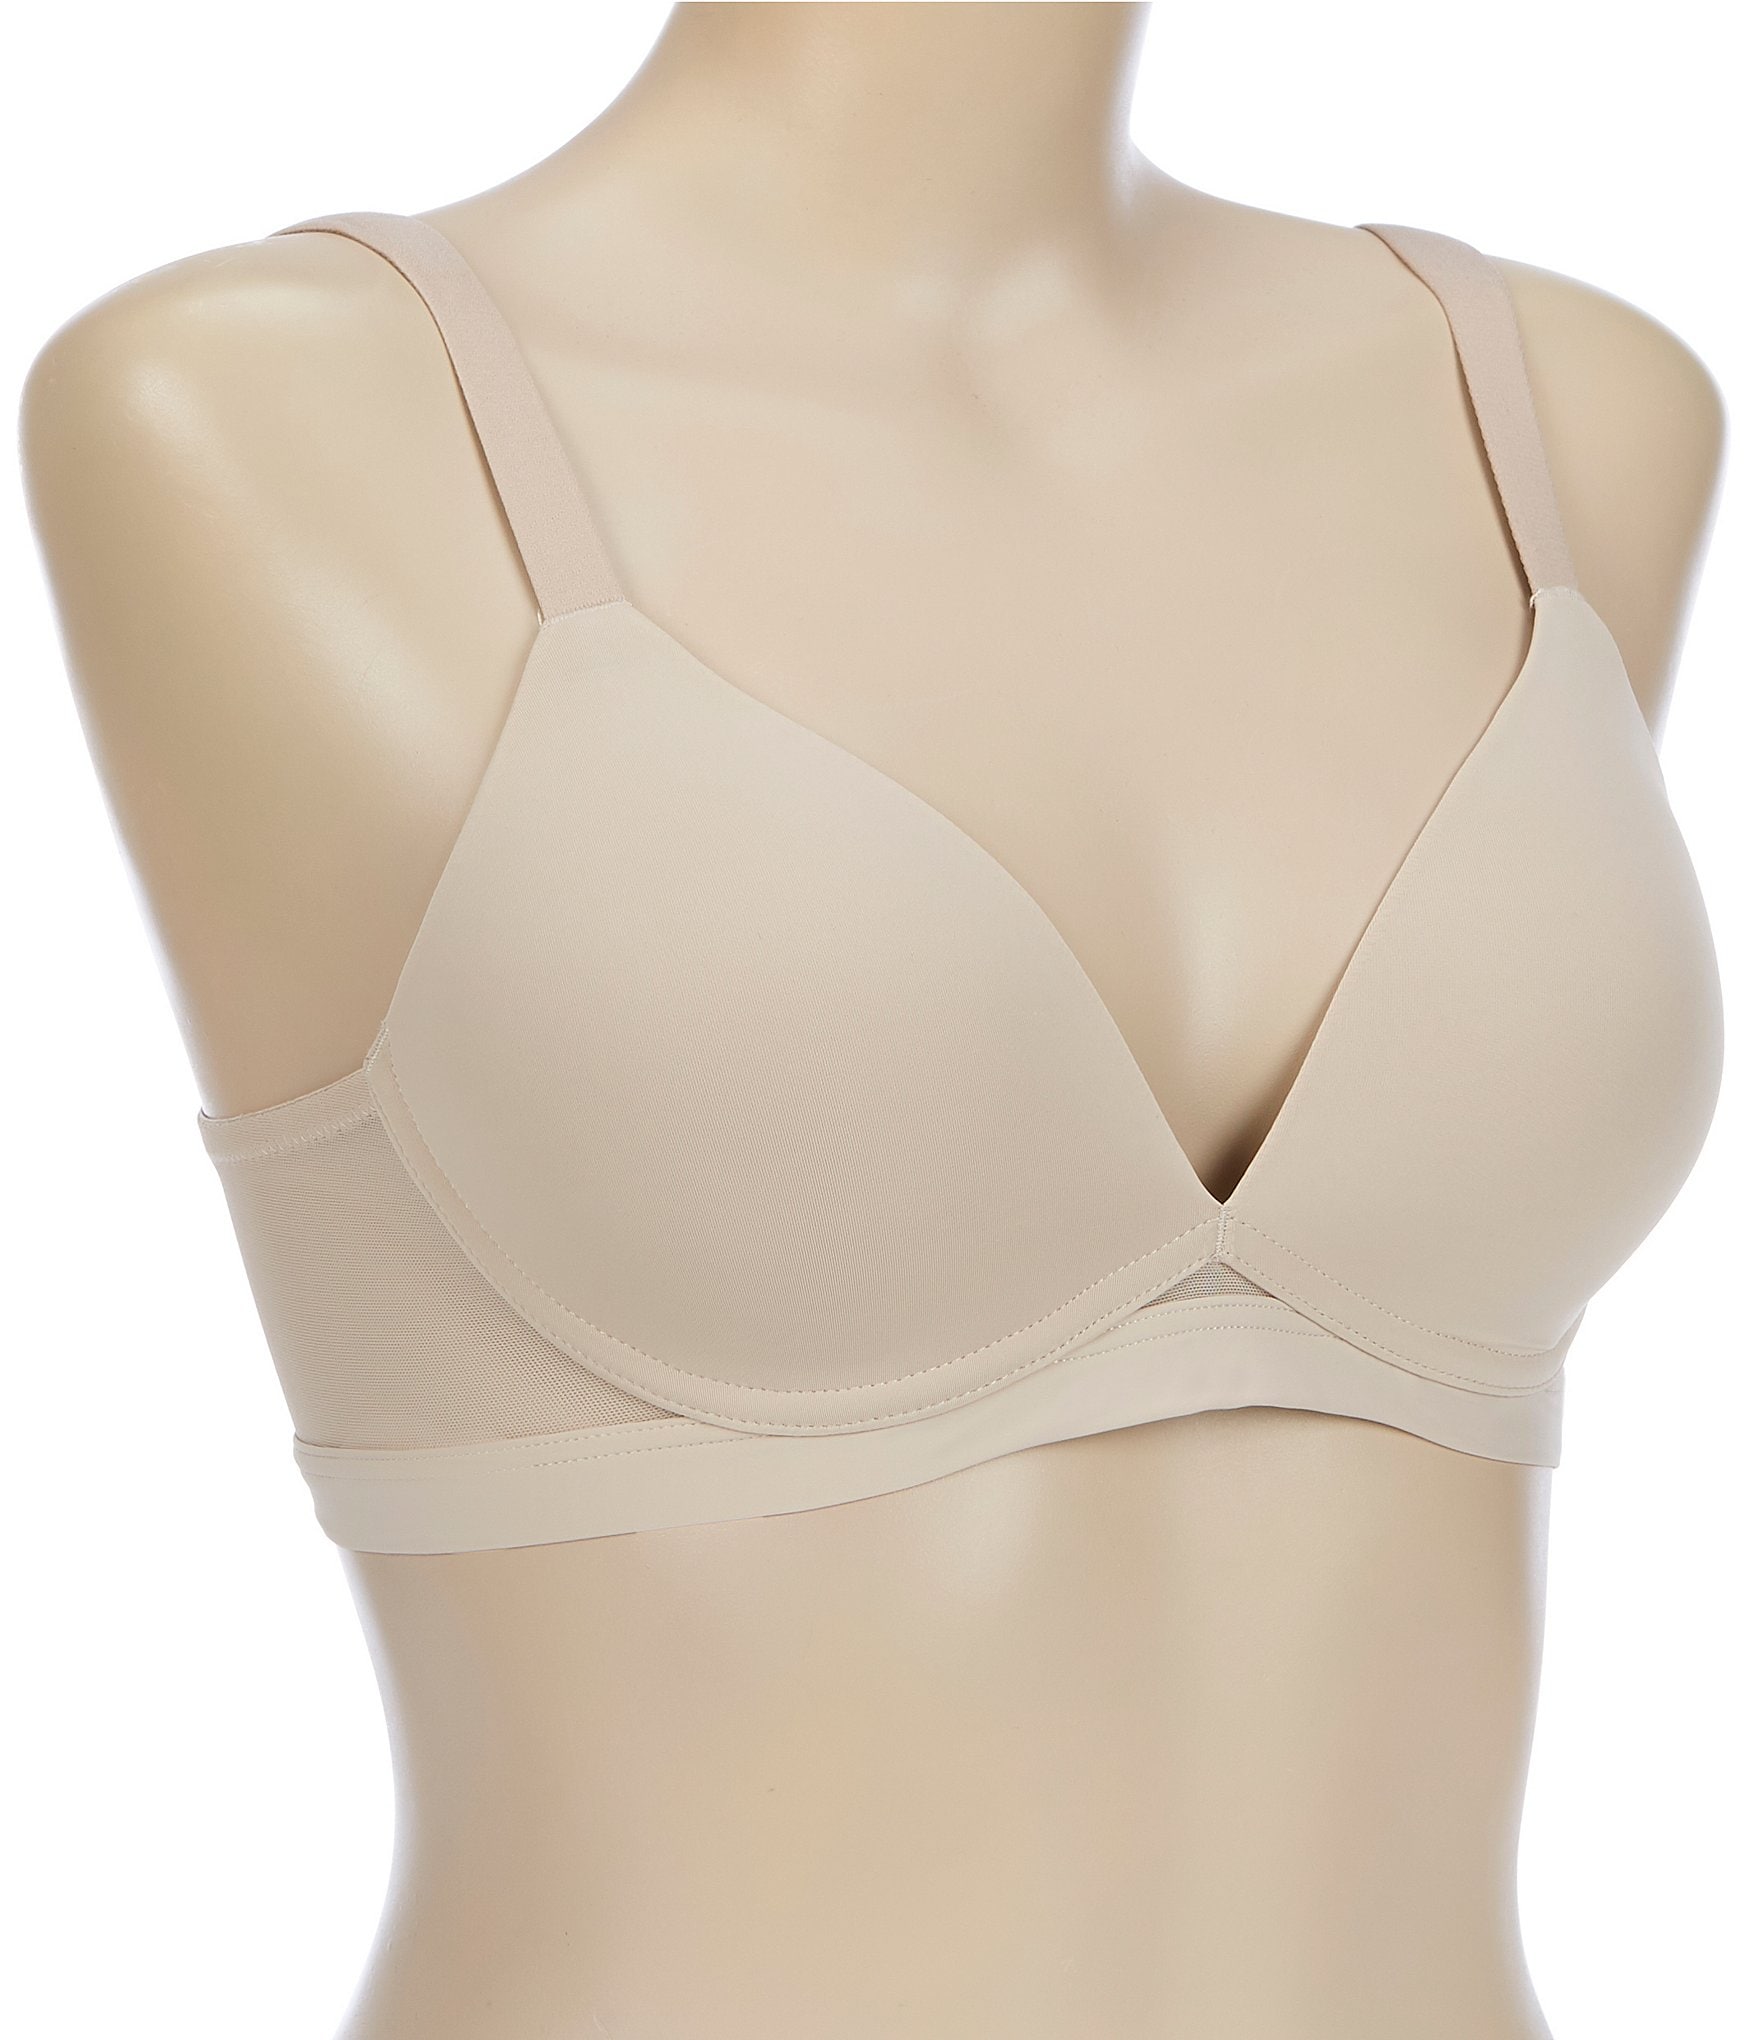 Simply Perfect by Warner's Women's Supersoft Lace Wirefree Bra - White 38C